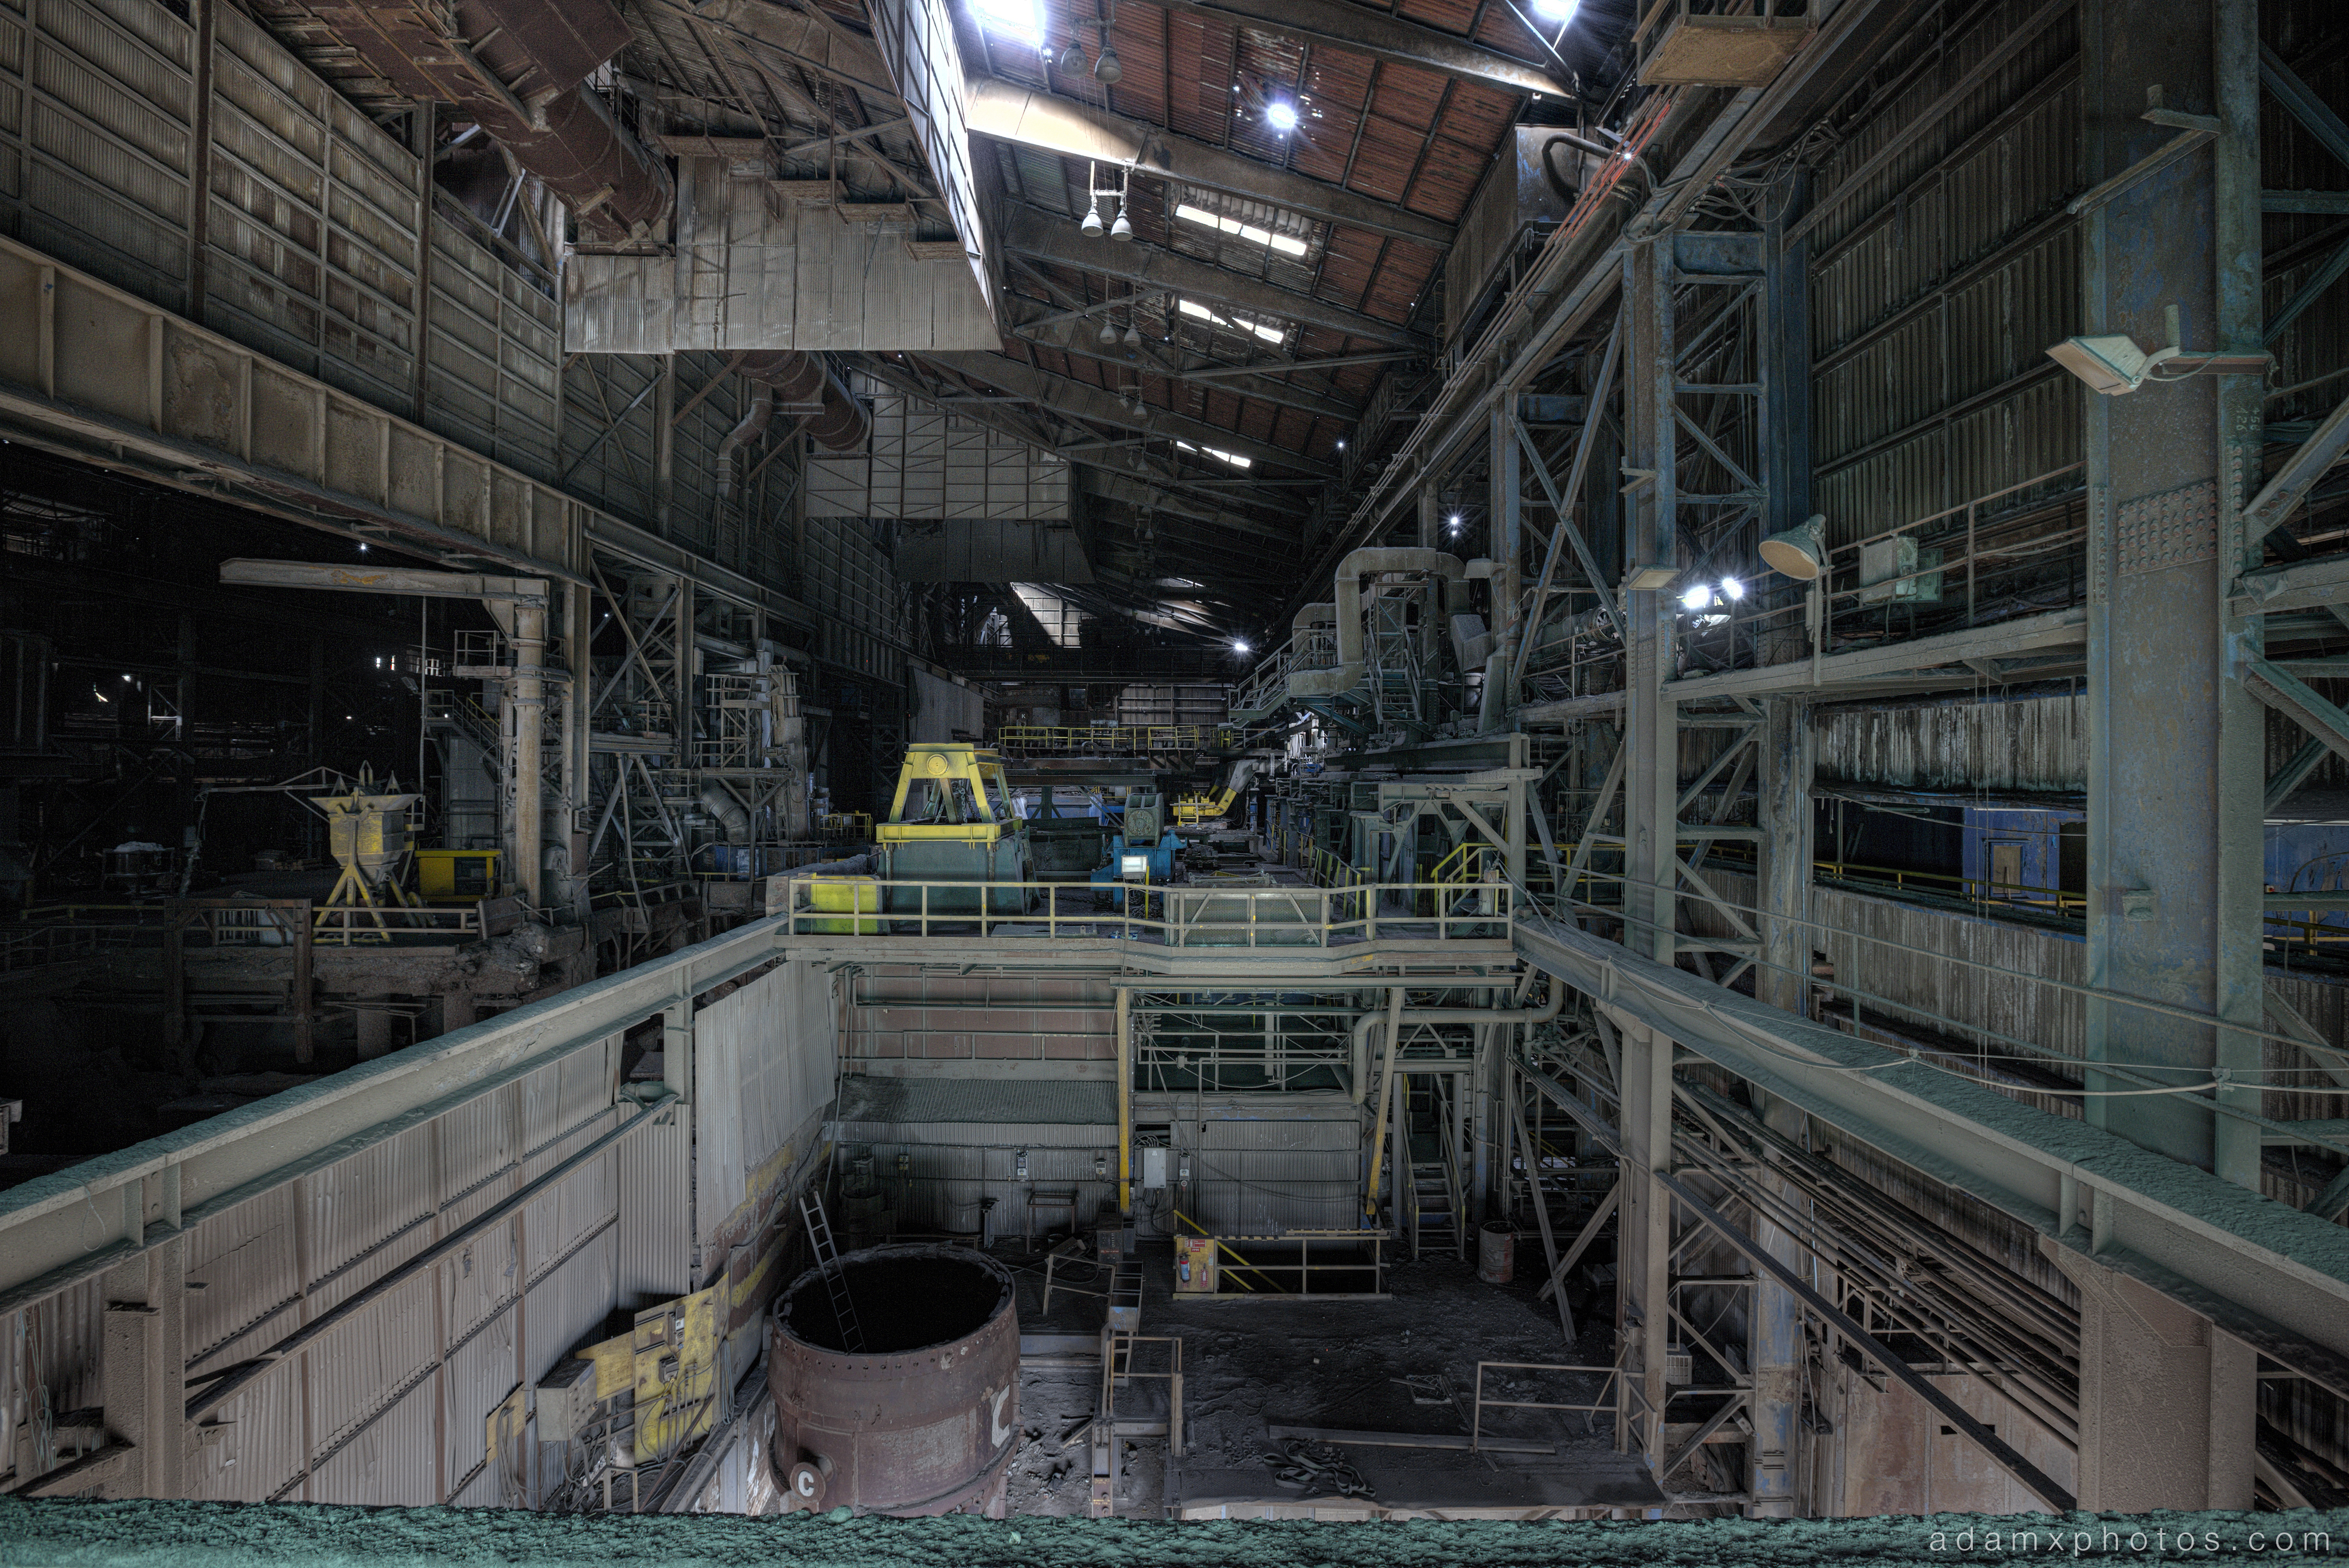 Thamesteel sheerness Thames Steel Urbex Urban exploration steel works mill industry industrial Adam X Urban Exploration Photo photos photographs UK March 2015 report abandoned disused derelict decay decayed